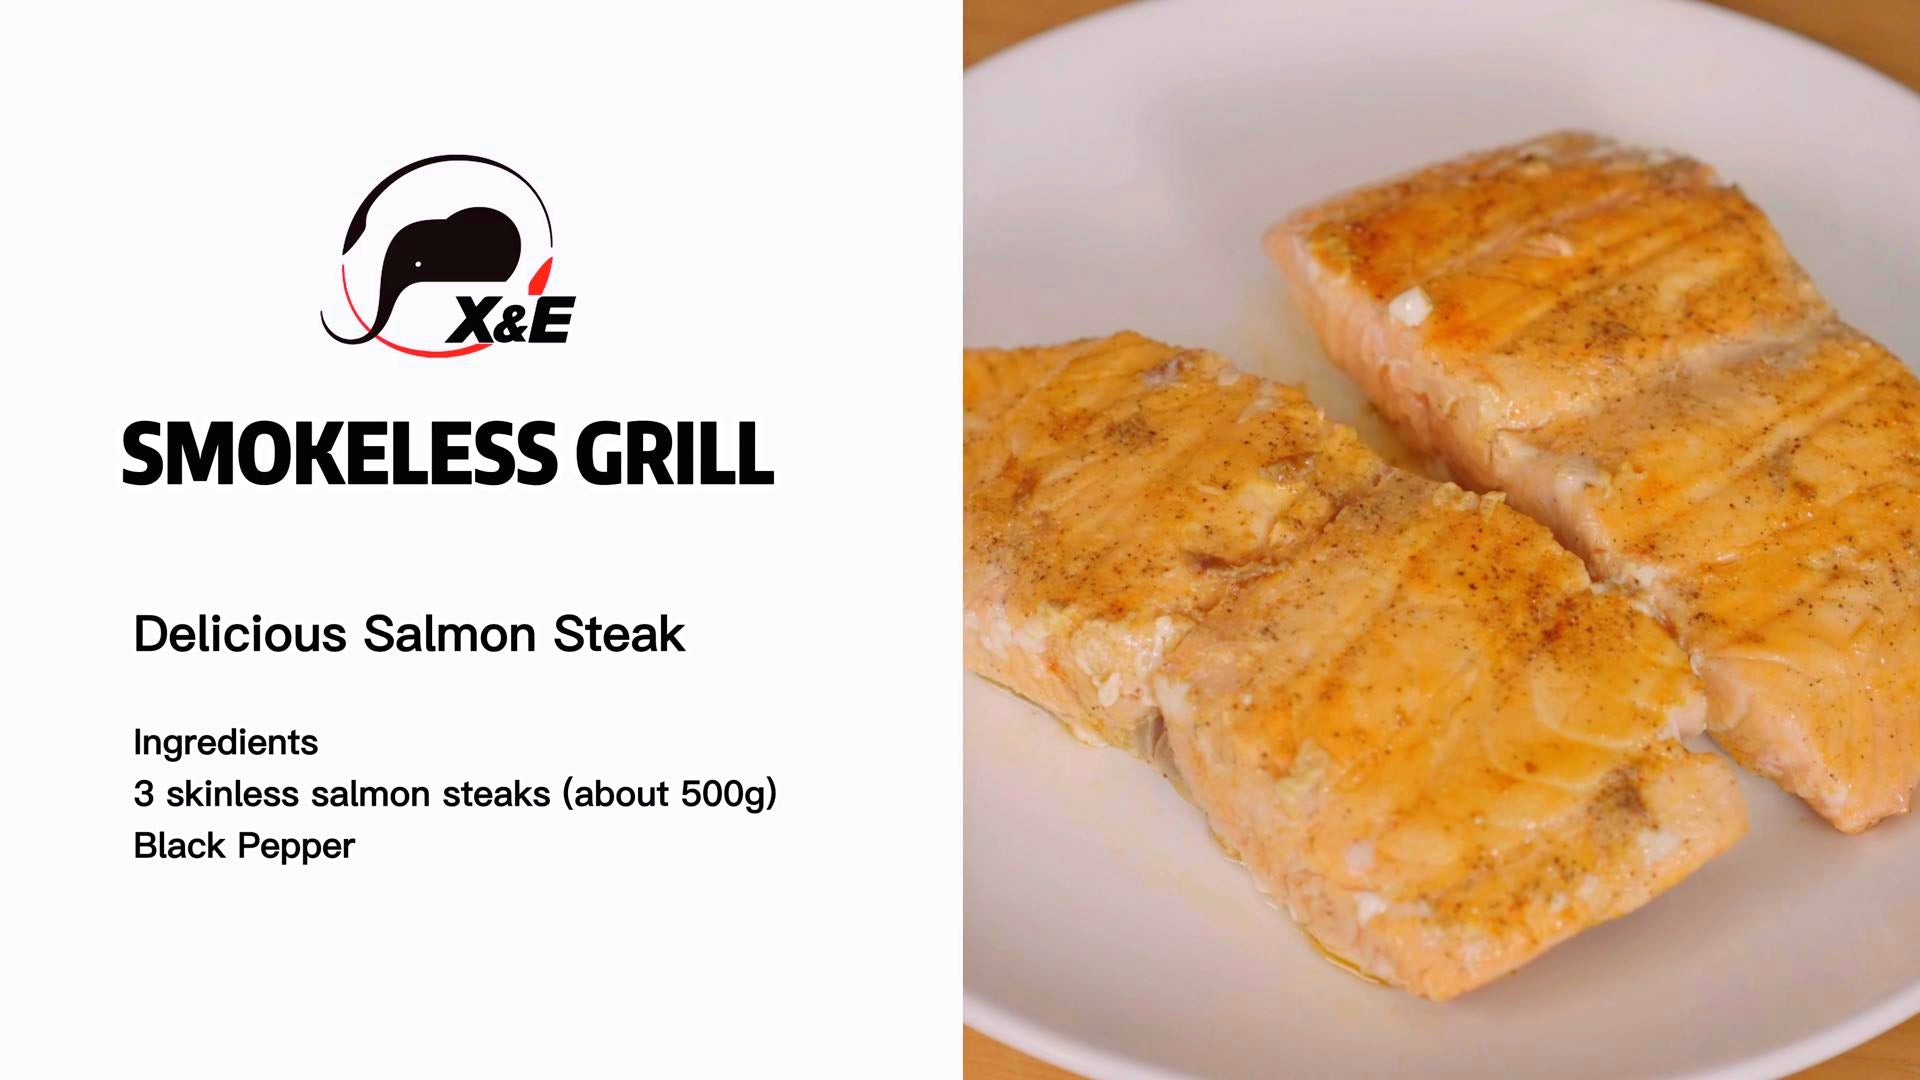 The X&E Smokeless Grill allows you to enjoy perfectly grilled salmon fillets that are crispy on the outside and moist on the inside, all without the need to grill outdoors or deal with smoke.